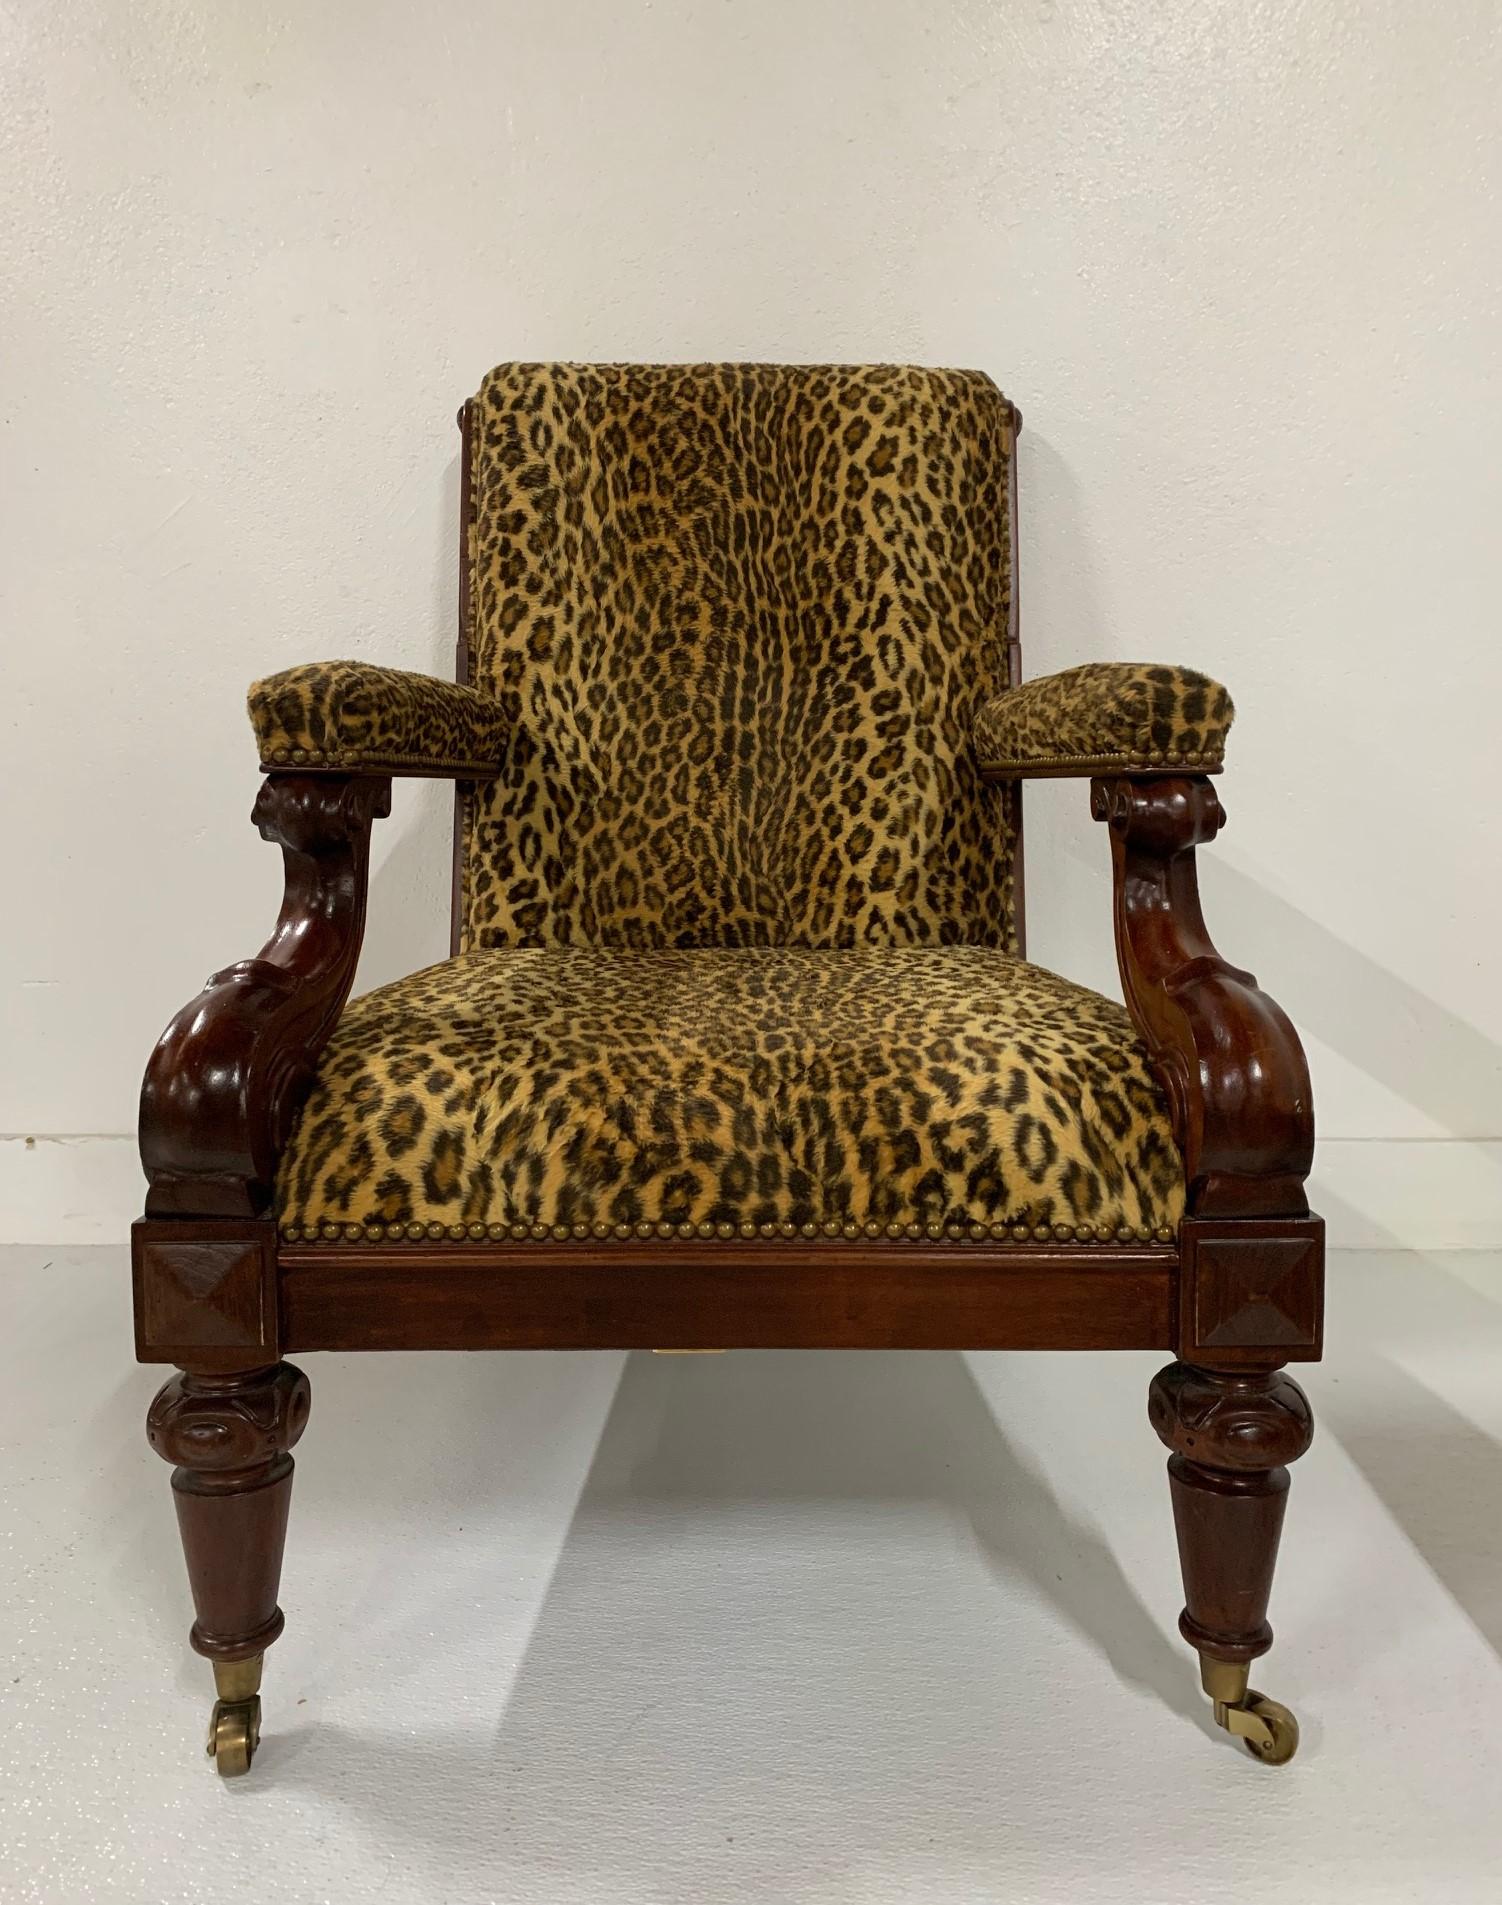 Ralph Lauren mahogany leopard print chair and ottoman. Has a solid mahogany frame, original upholstery and brass casters. Chair has an antique style.
Chair measures: 38.25 H x 27.5 W x 34.25 D. seat height 16.5, ottoman 27.5 square x 16.5 H.